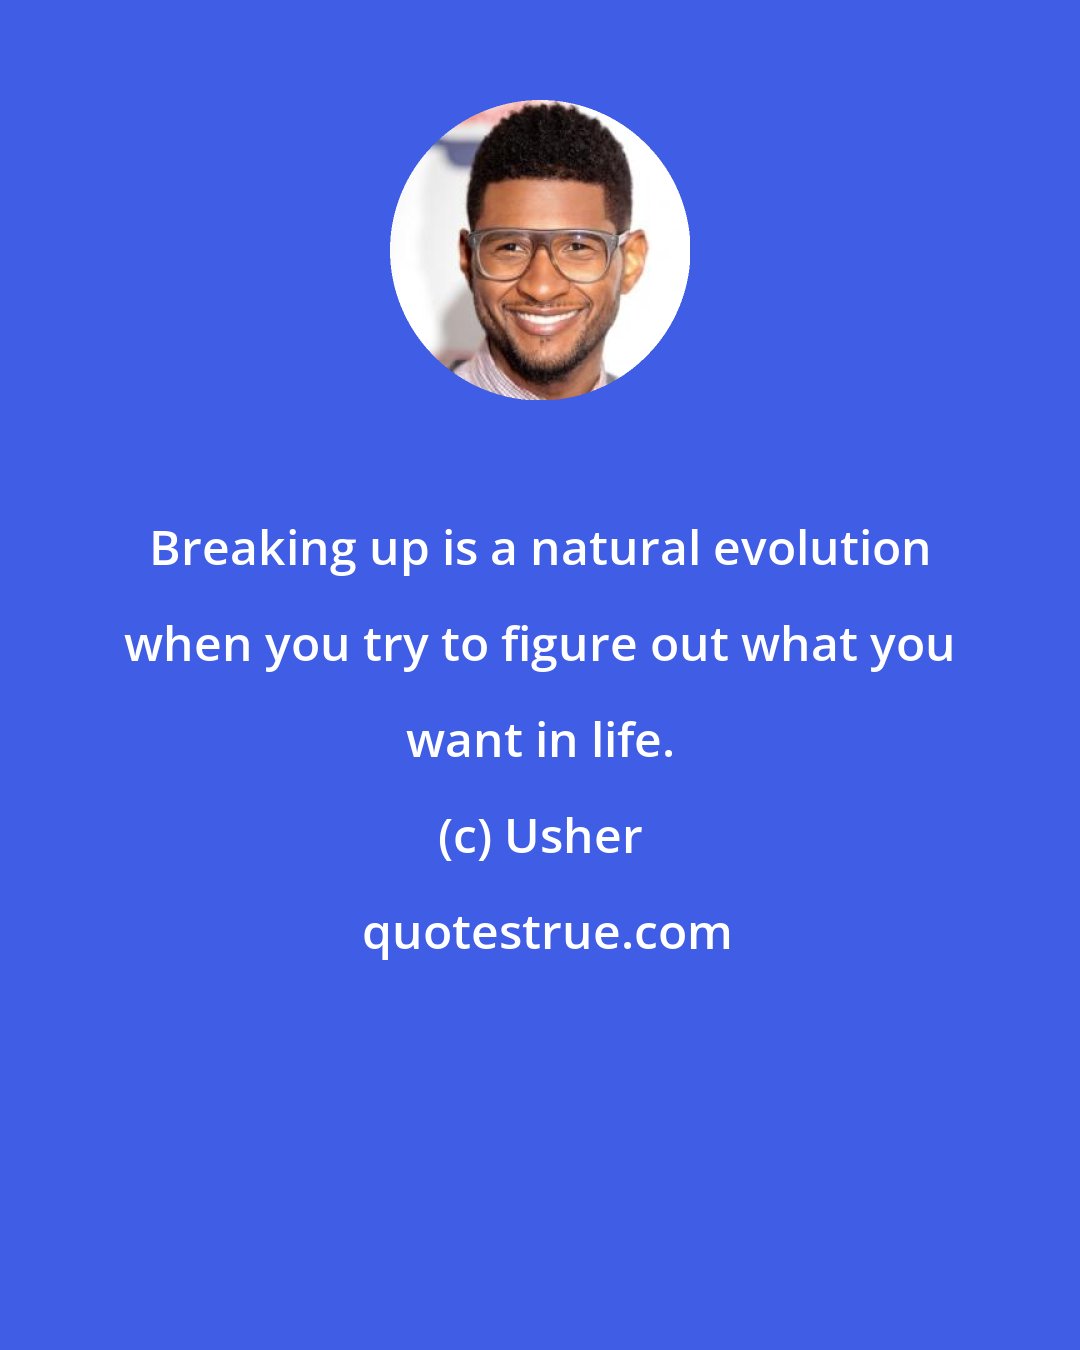 Usher: Breaking up is a natural evolution when you try to figure out what you want in life.